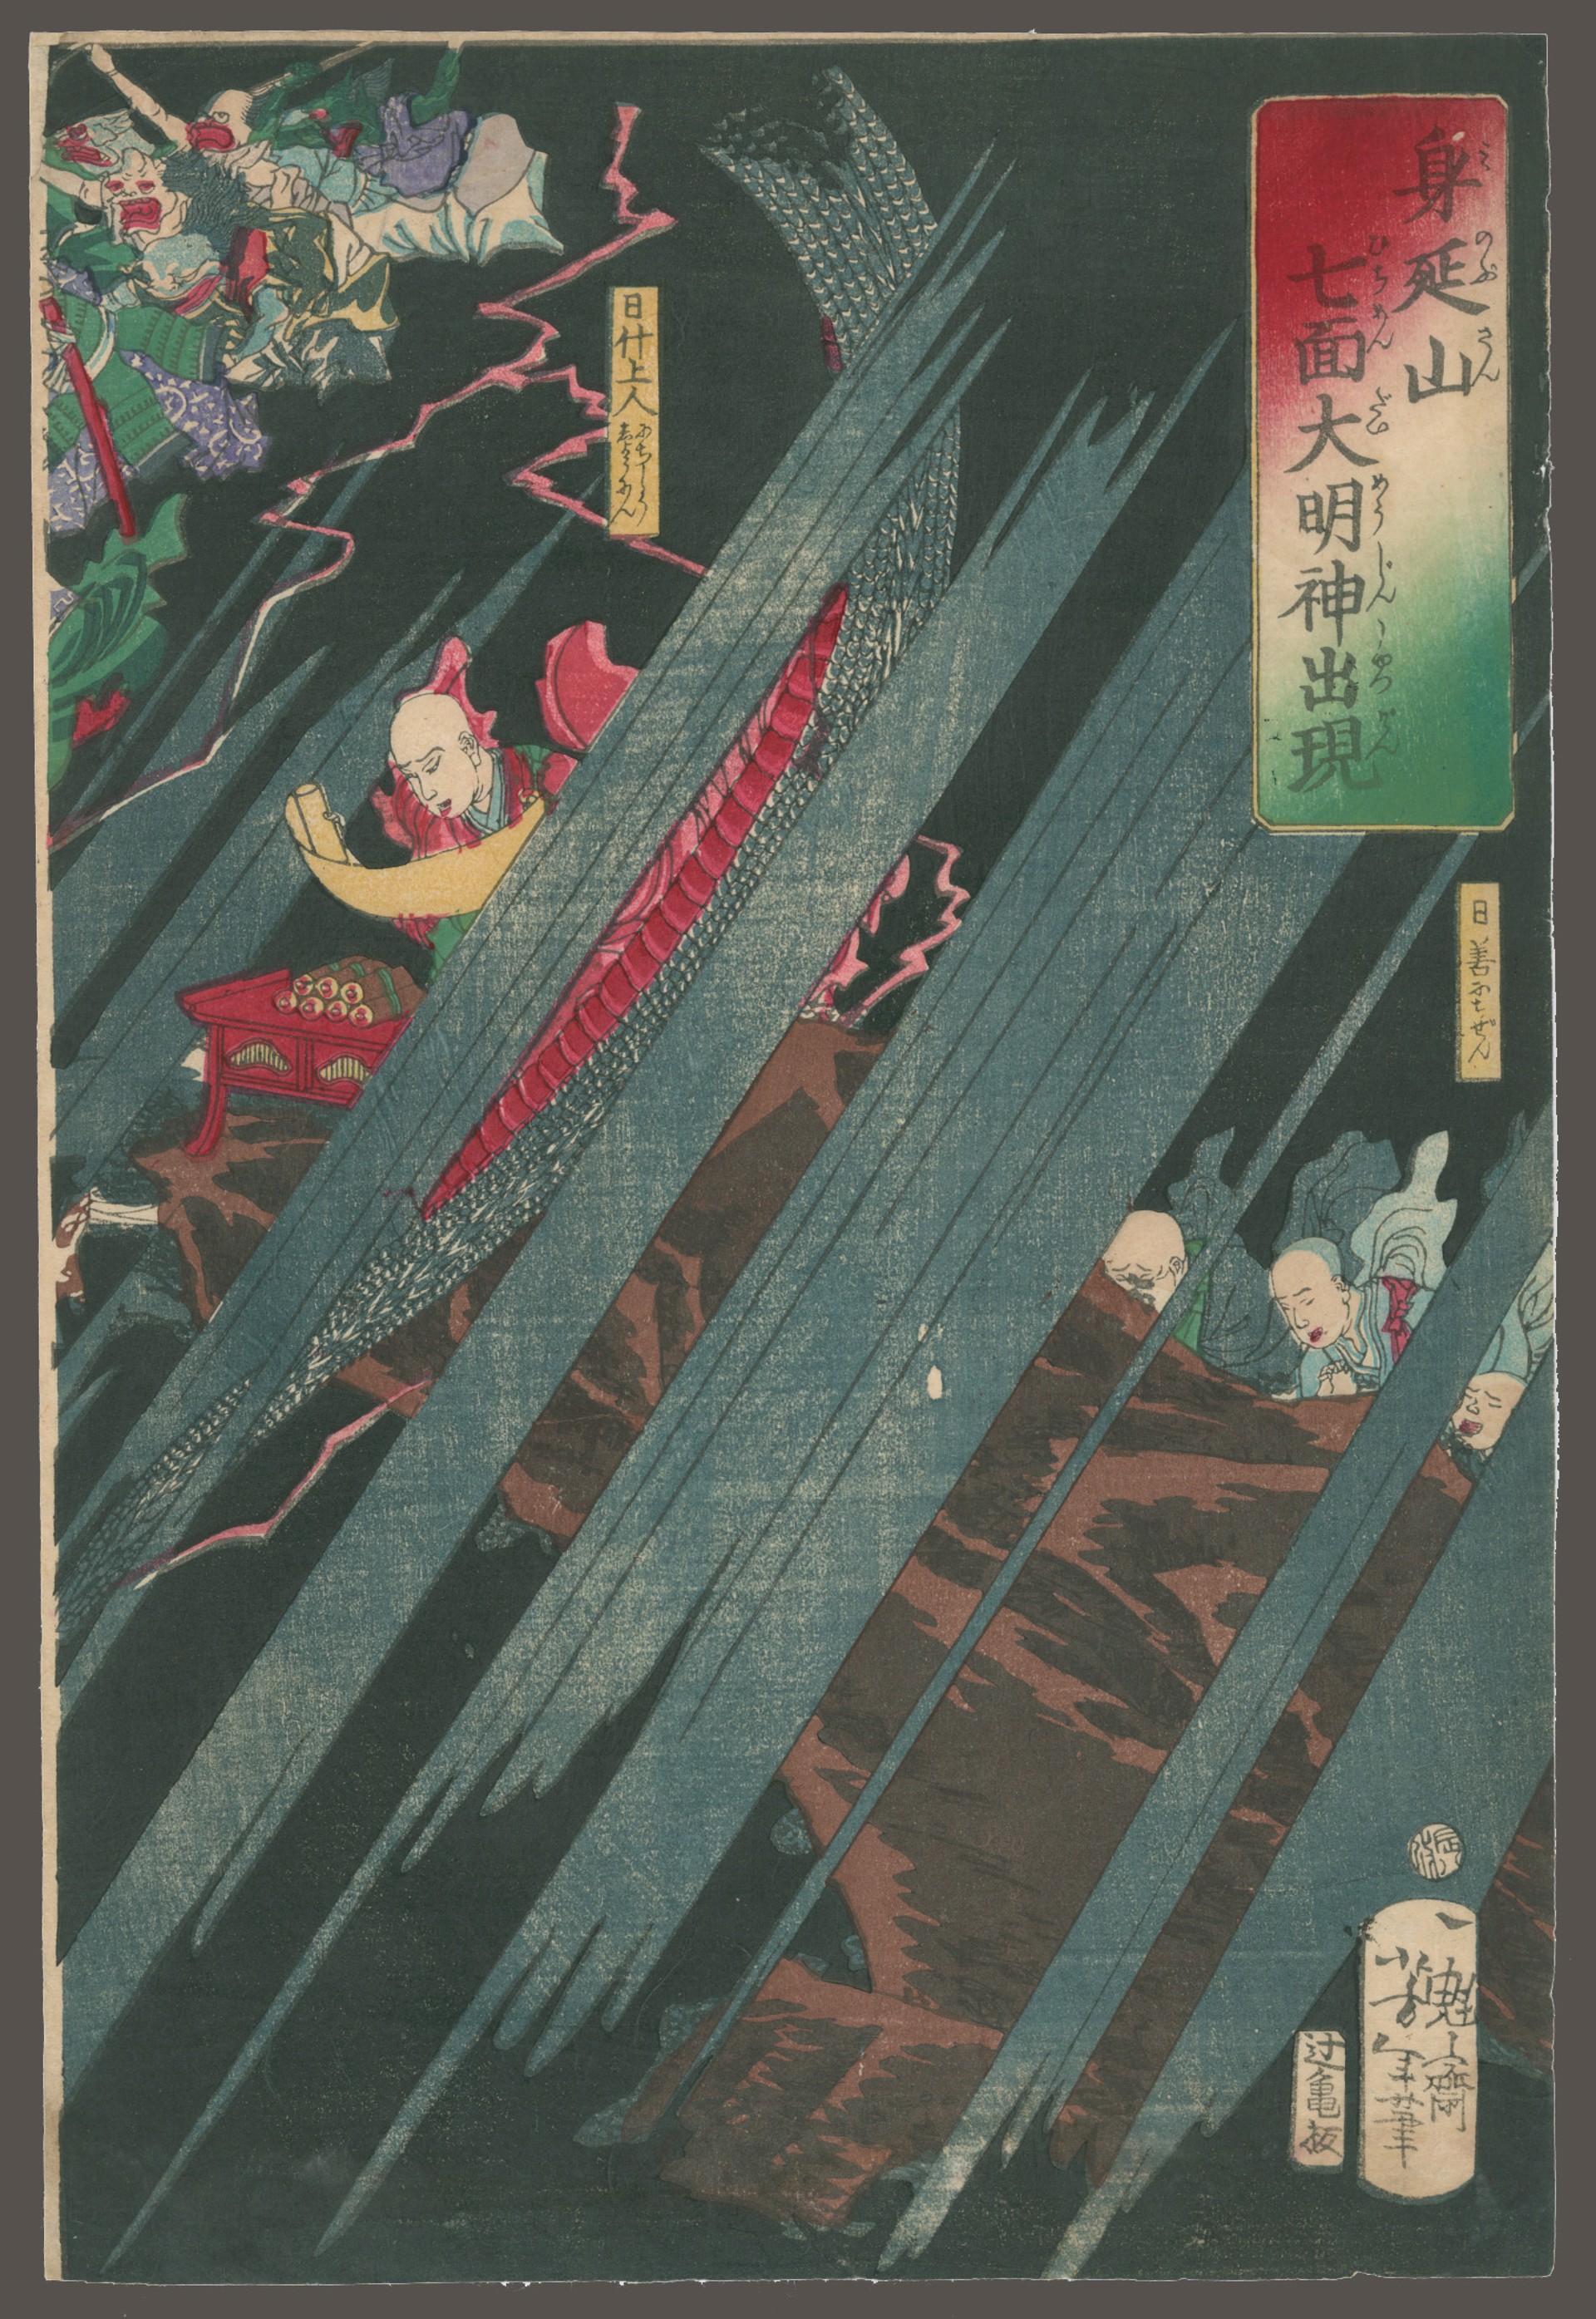 The Appearance of the Seven-headed Dragon God by Yoshitoshi